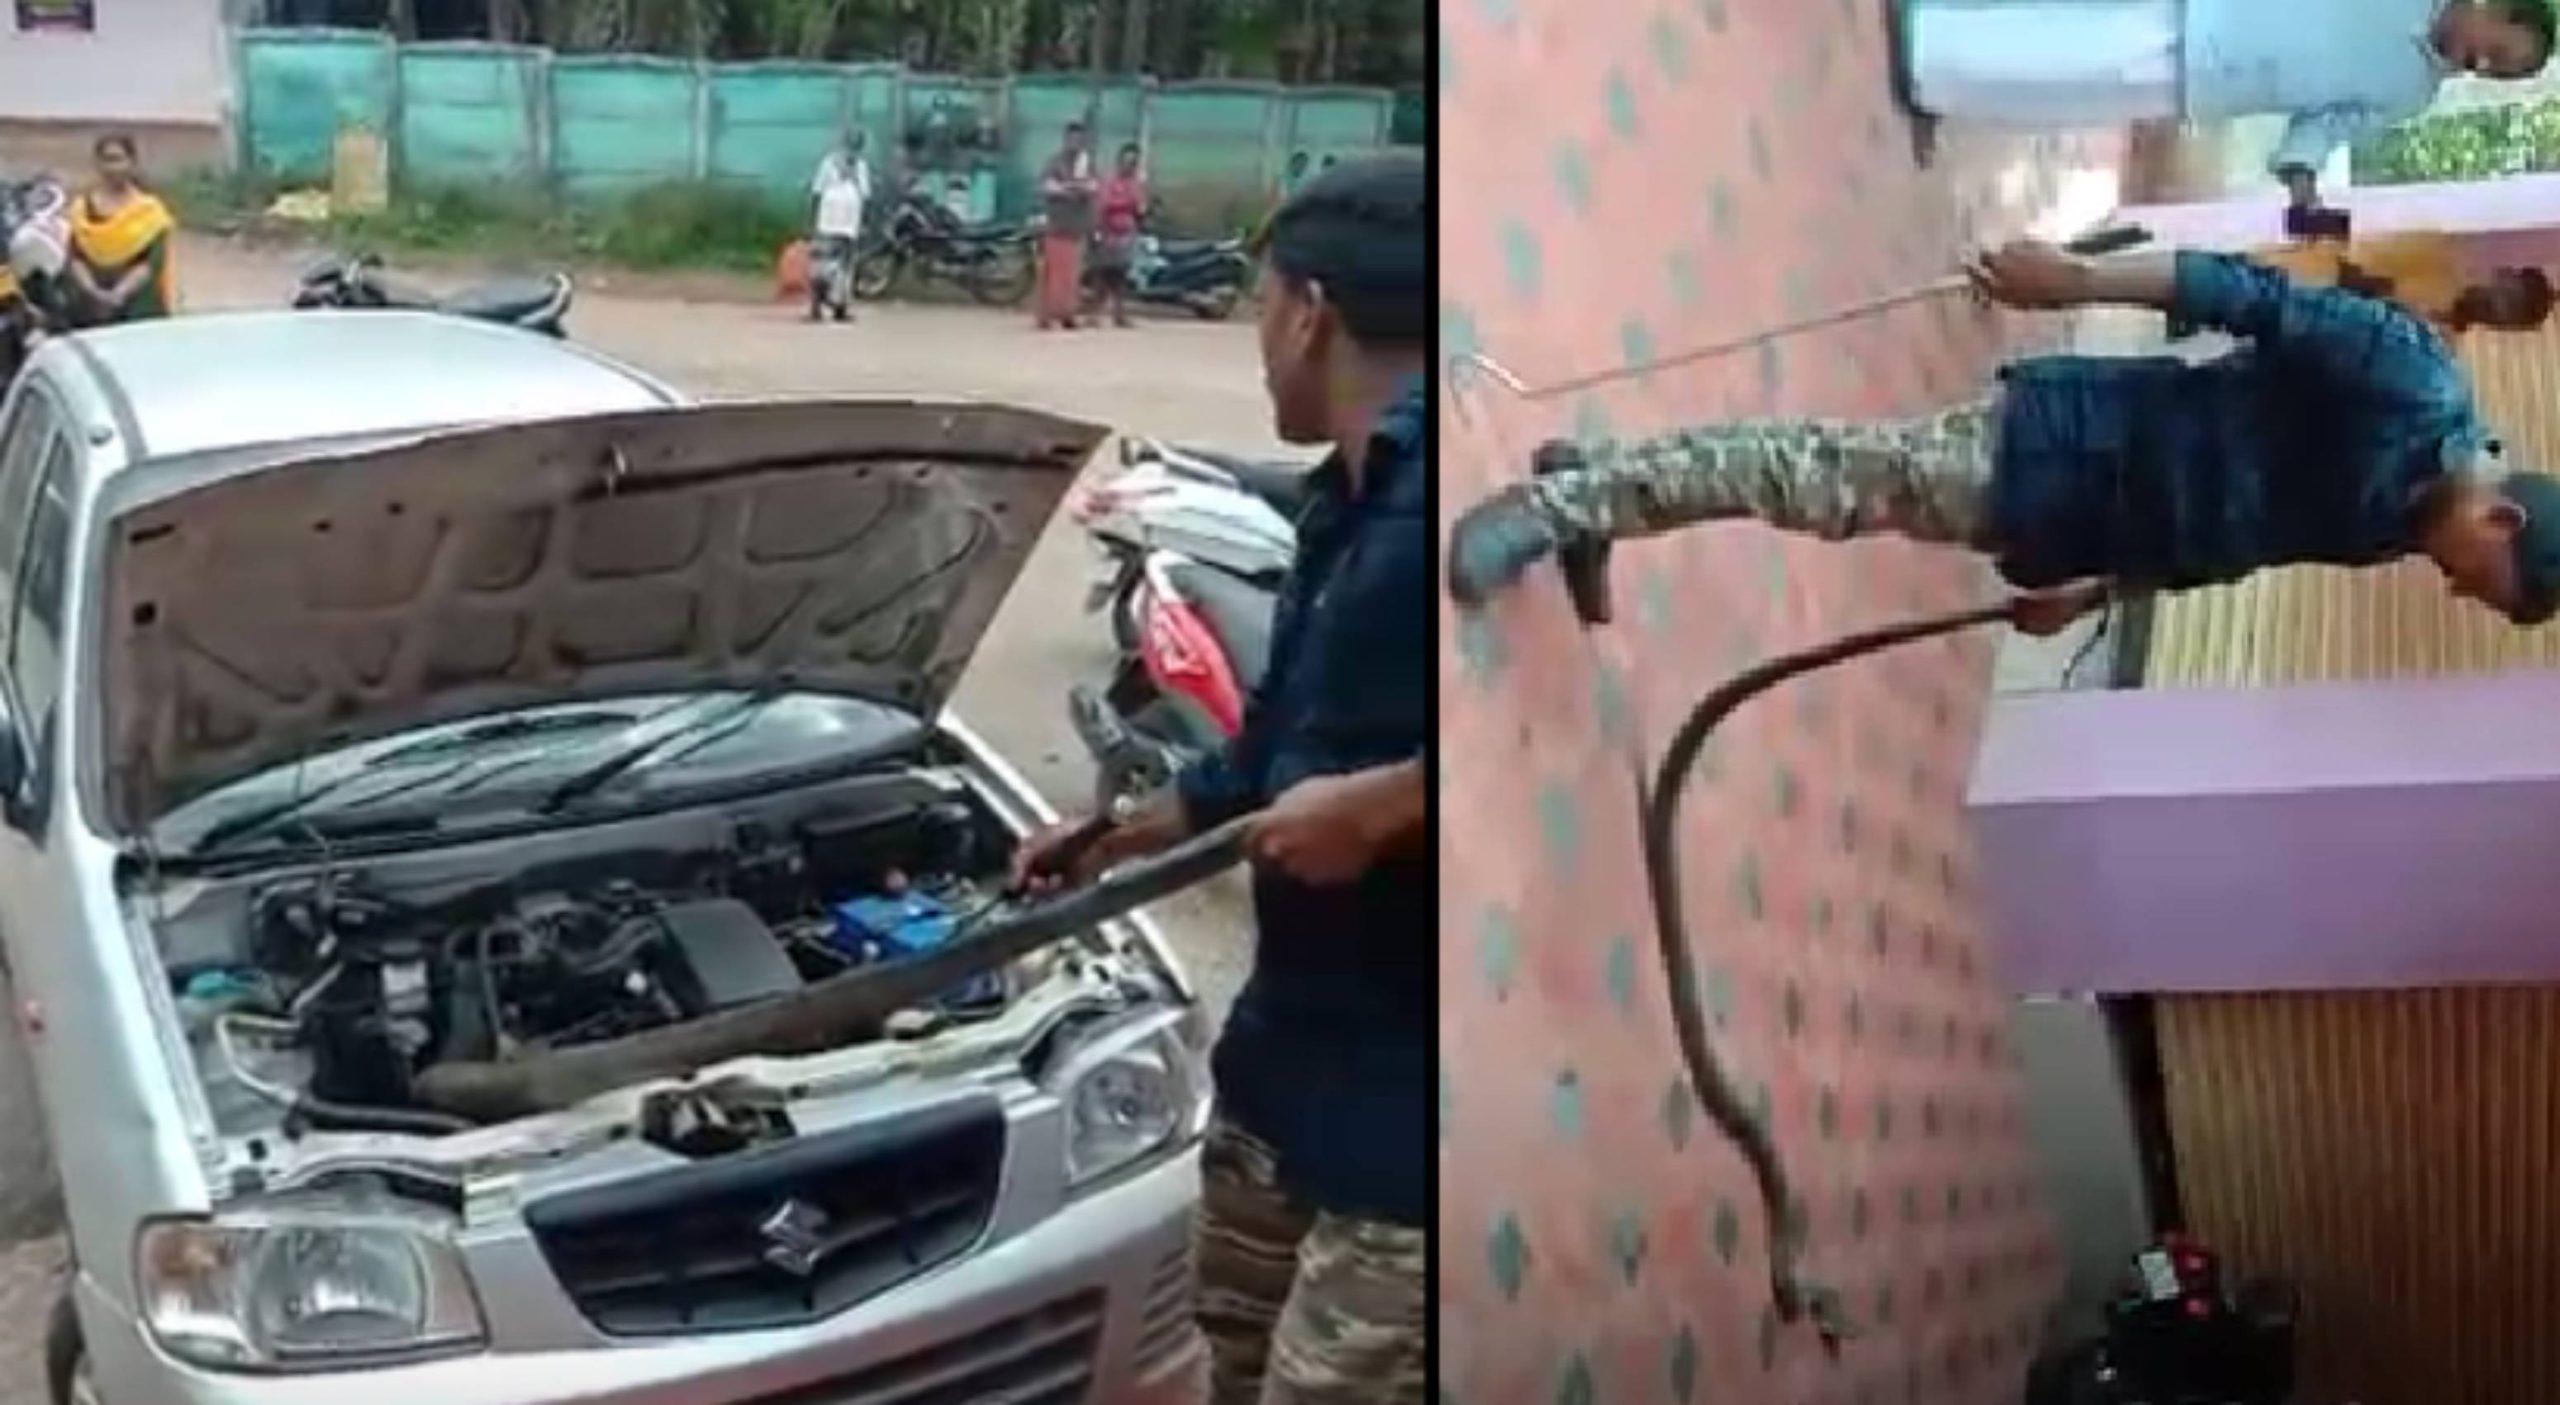 King cobra was caught from car bonnet